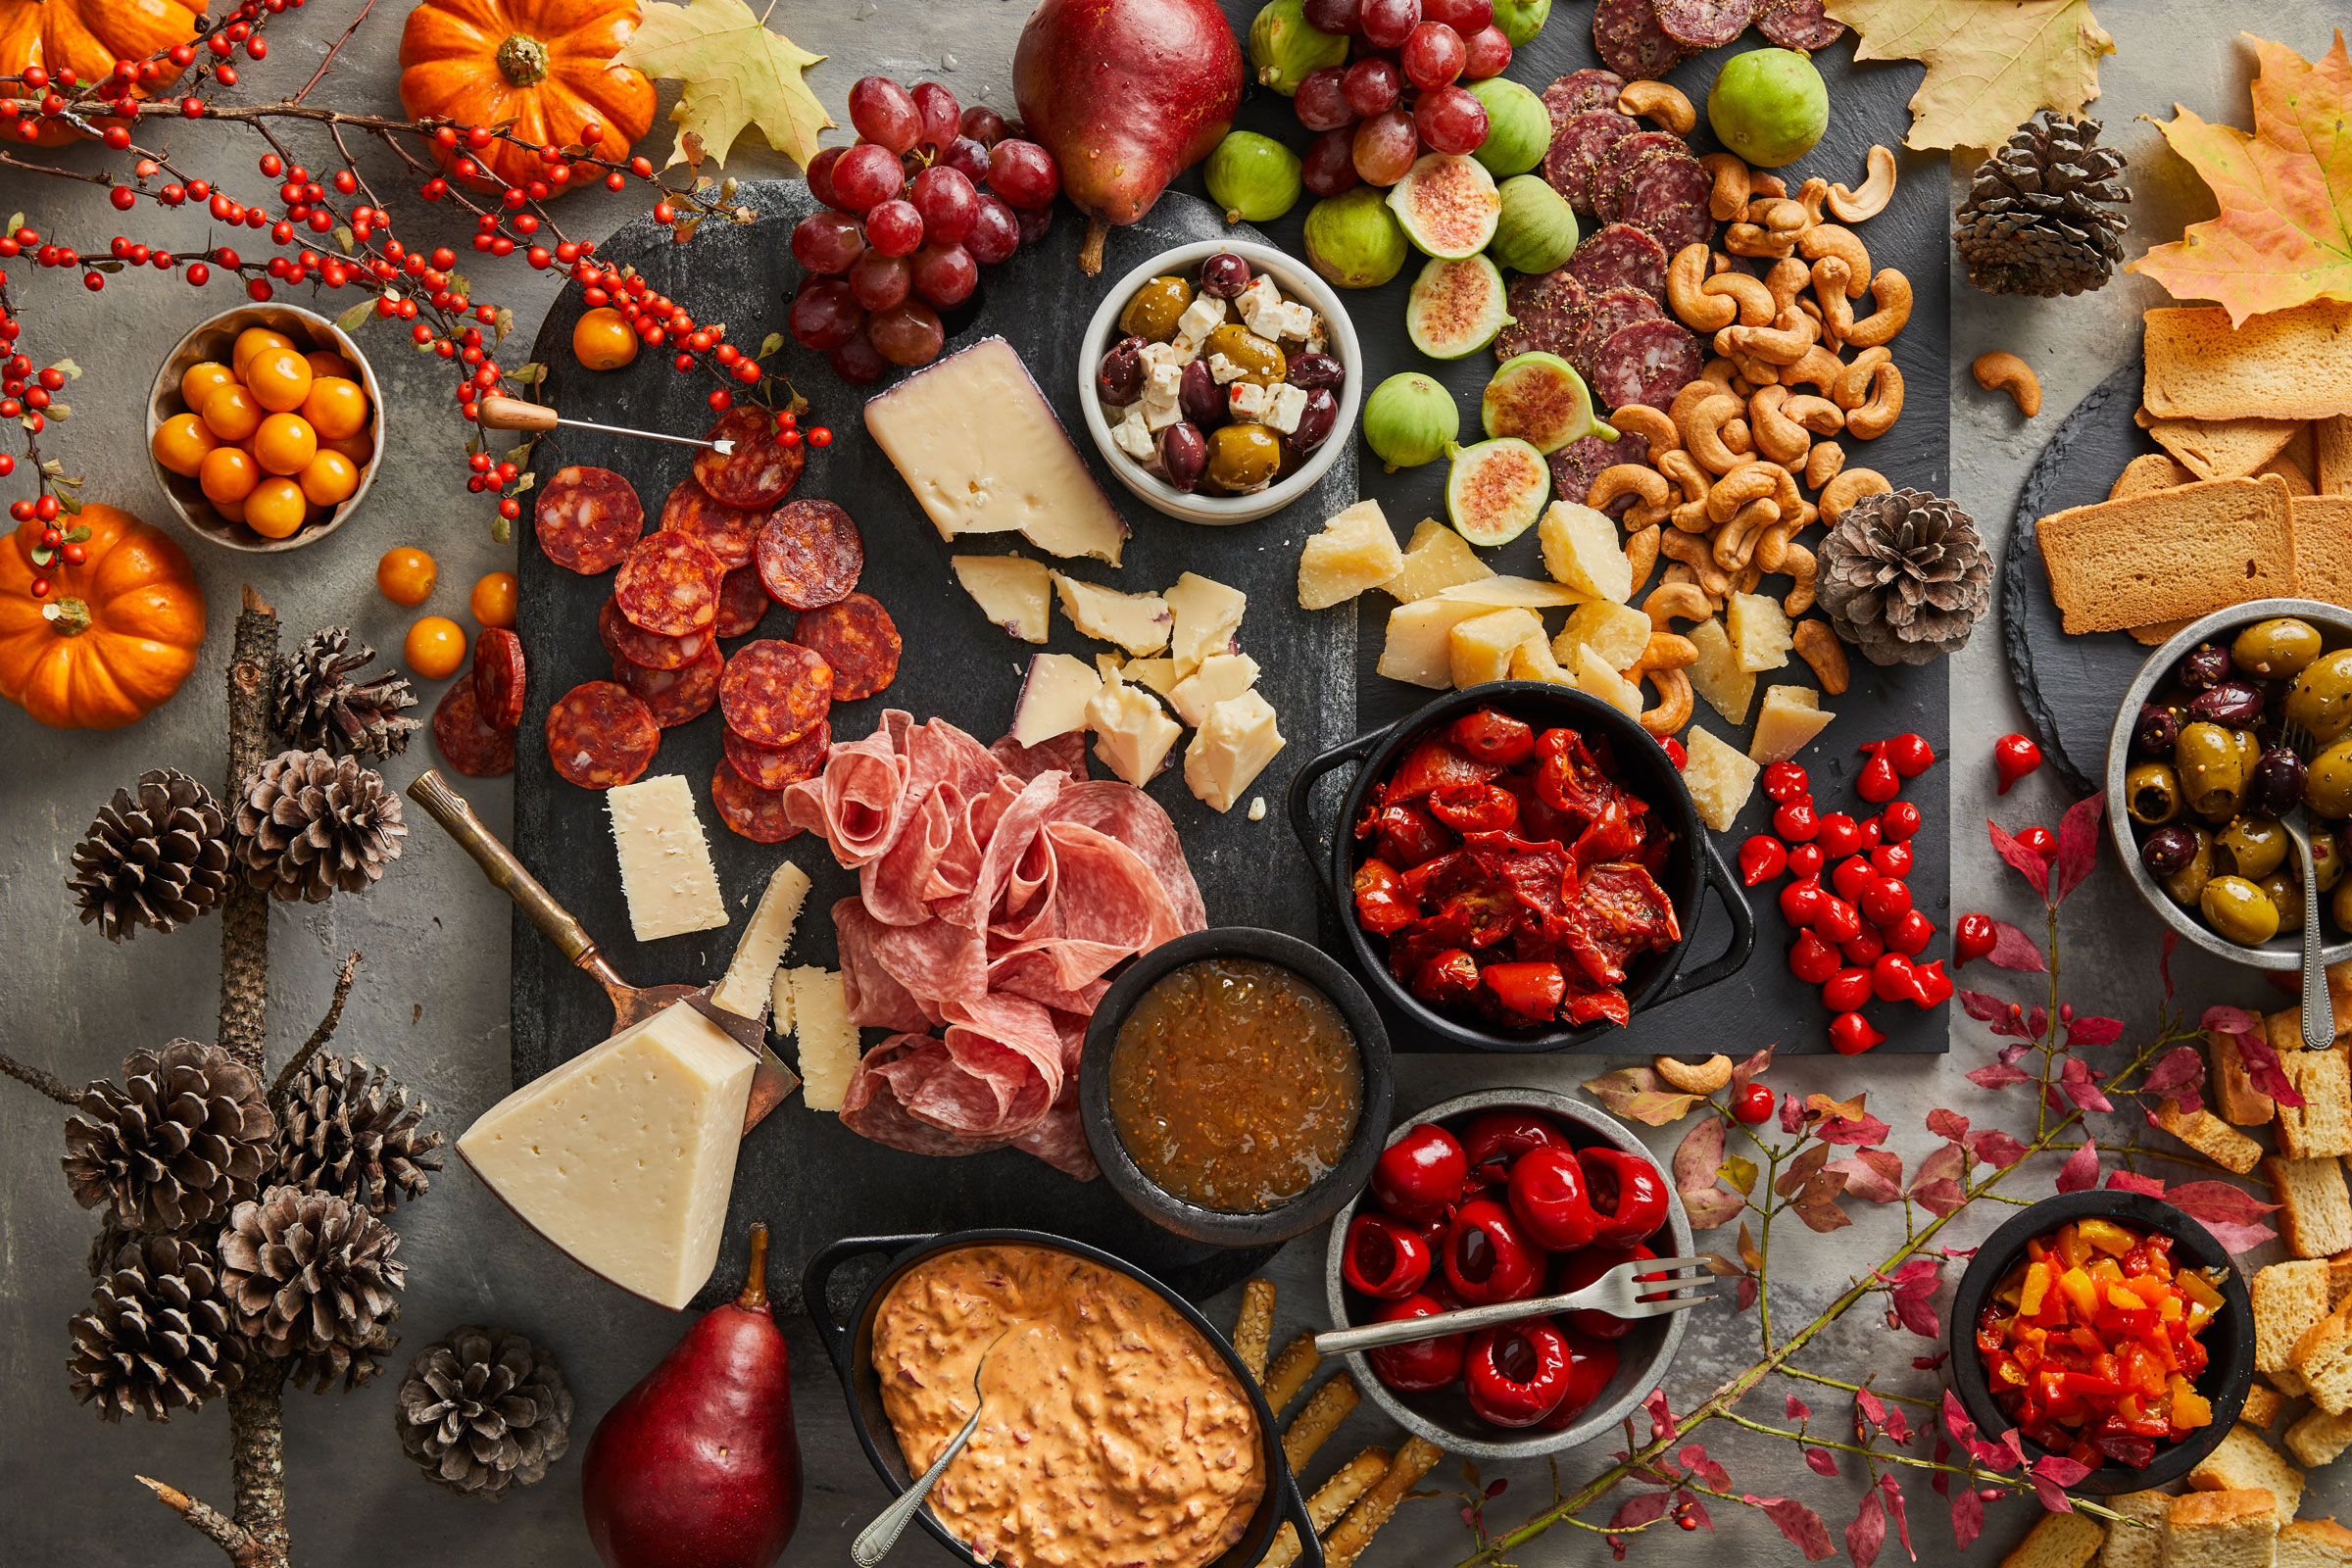 Festive Fall Charcuterie and Cheese Board